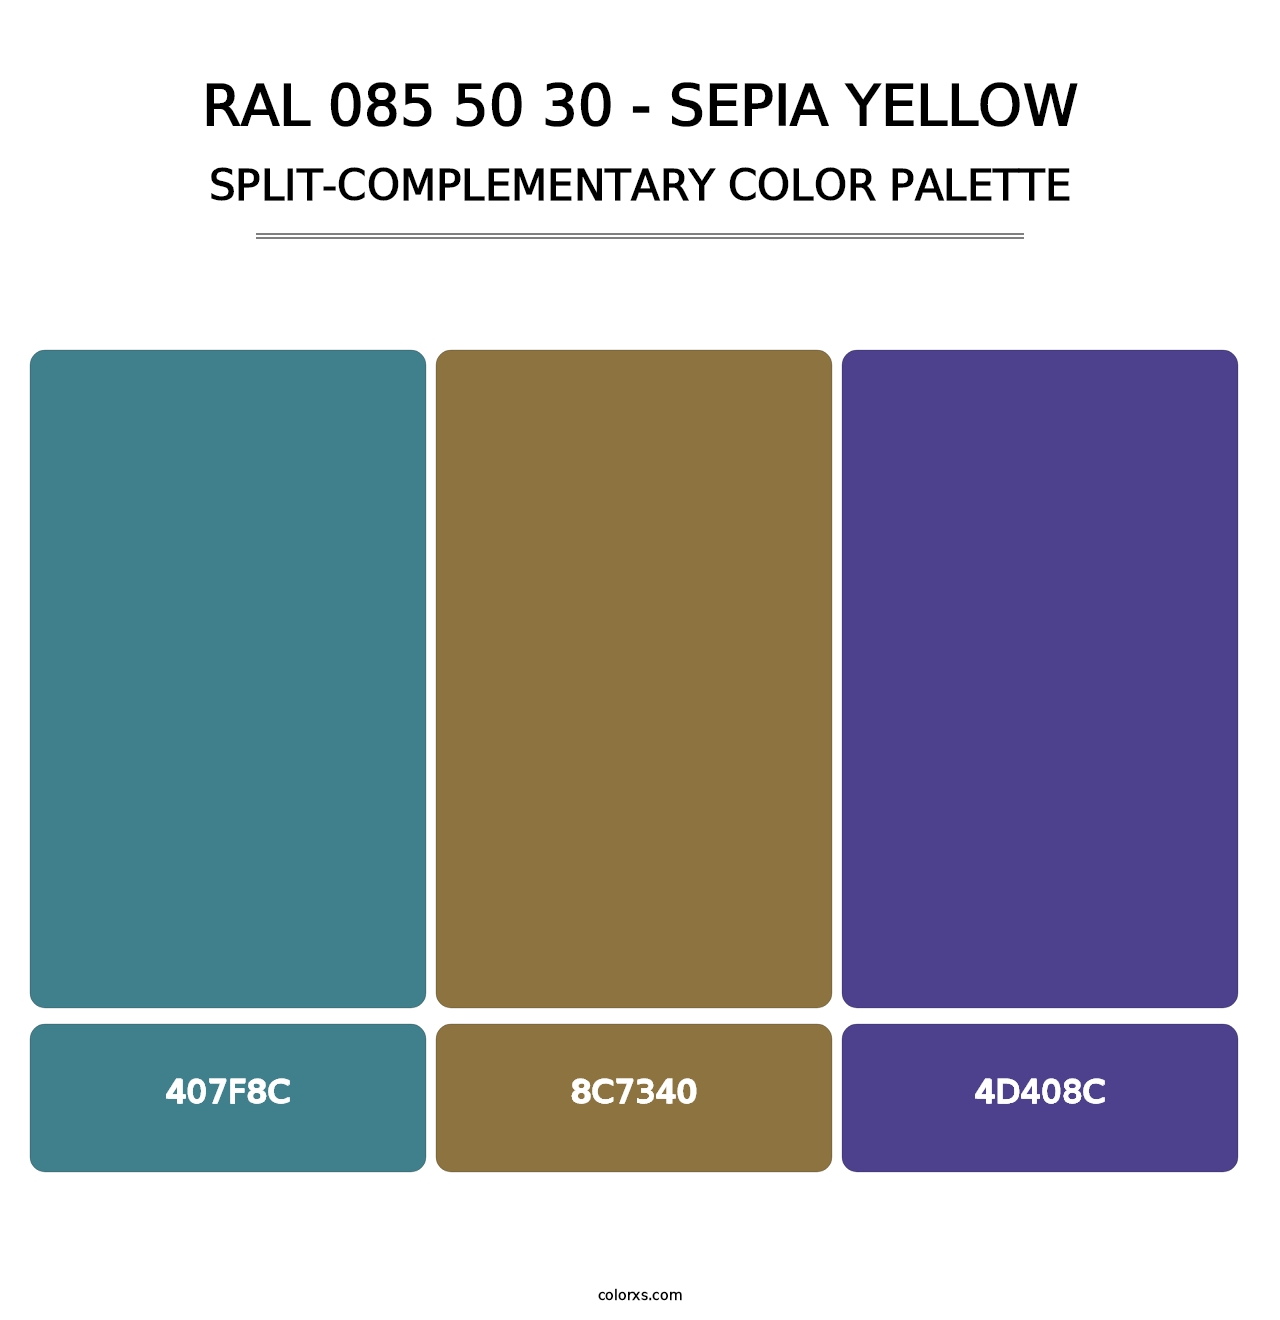 RAL 085 50 30 - Sepia Yellow - Split-Complementary Color Palette